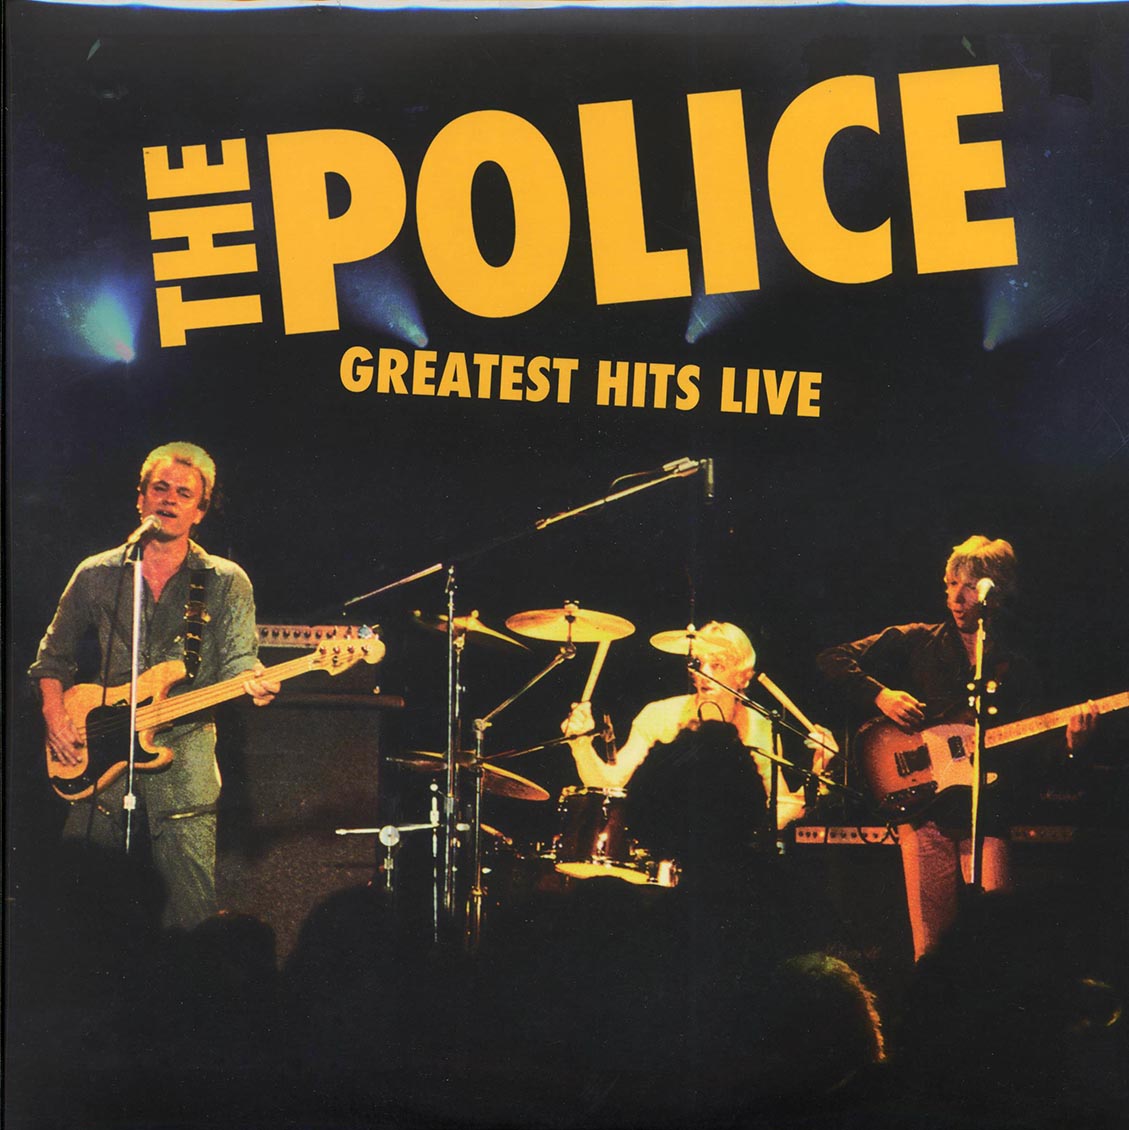 The Police - Greatest Hits Live (180g) - Vinyl LP